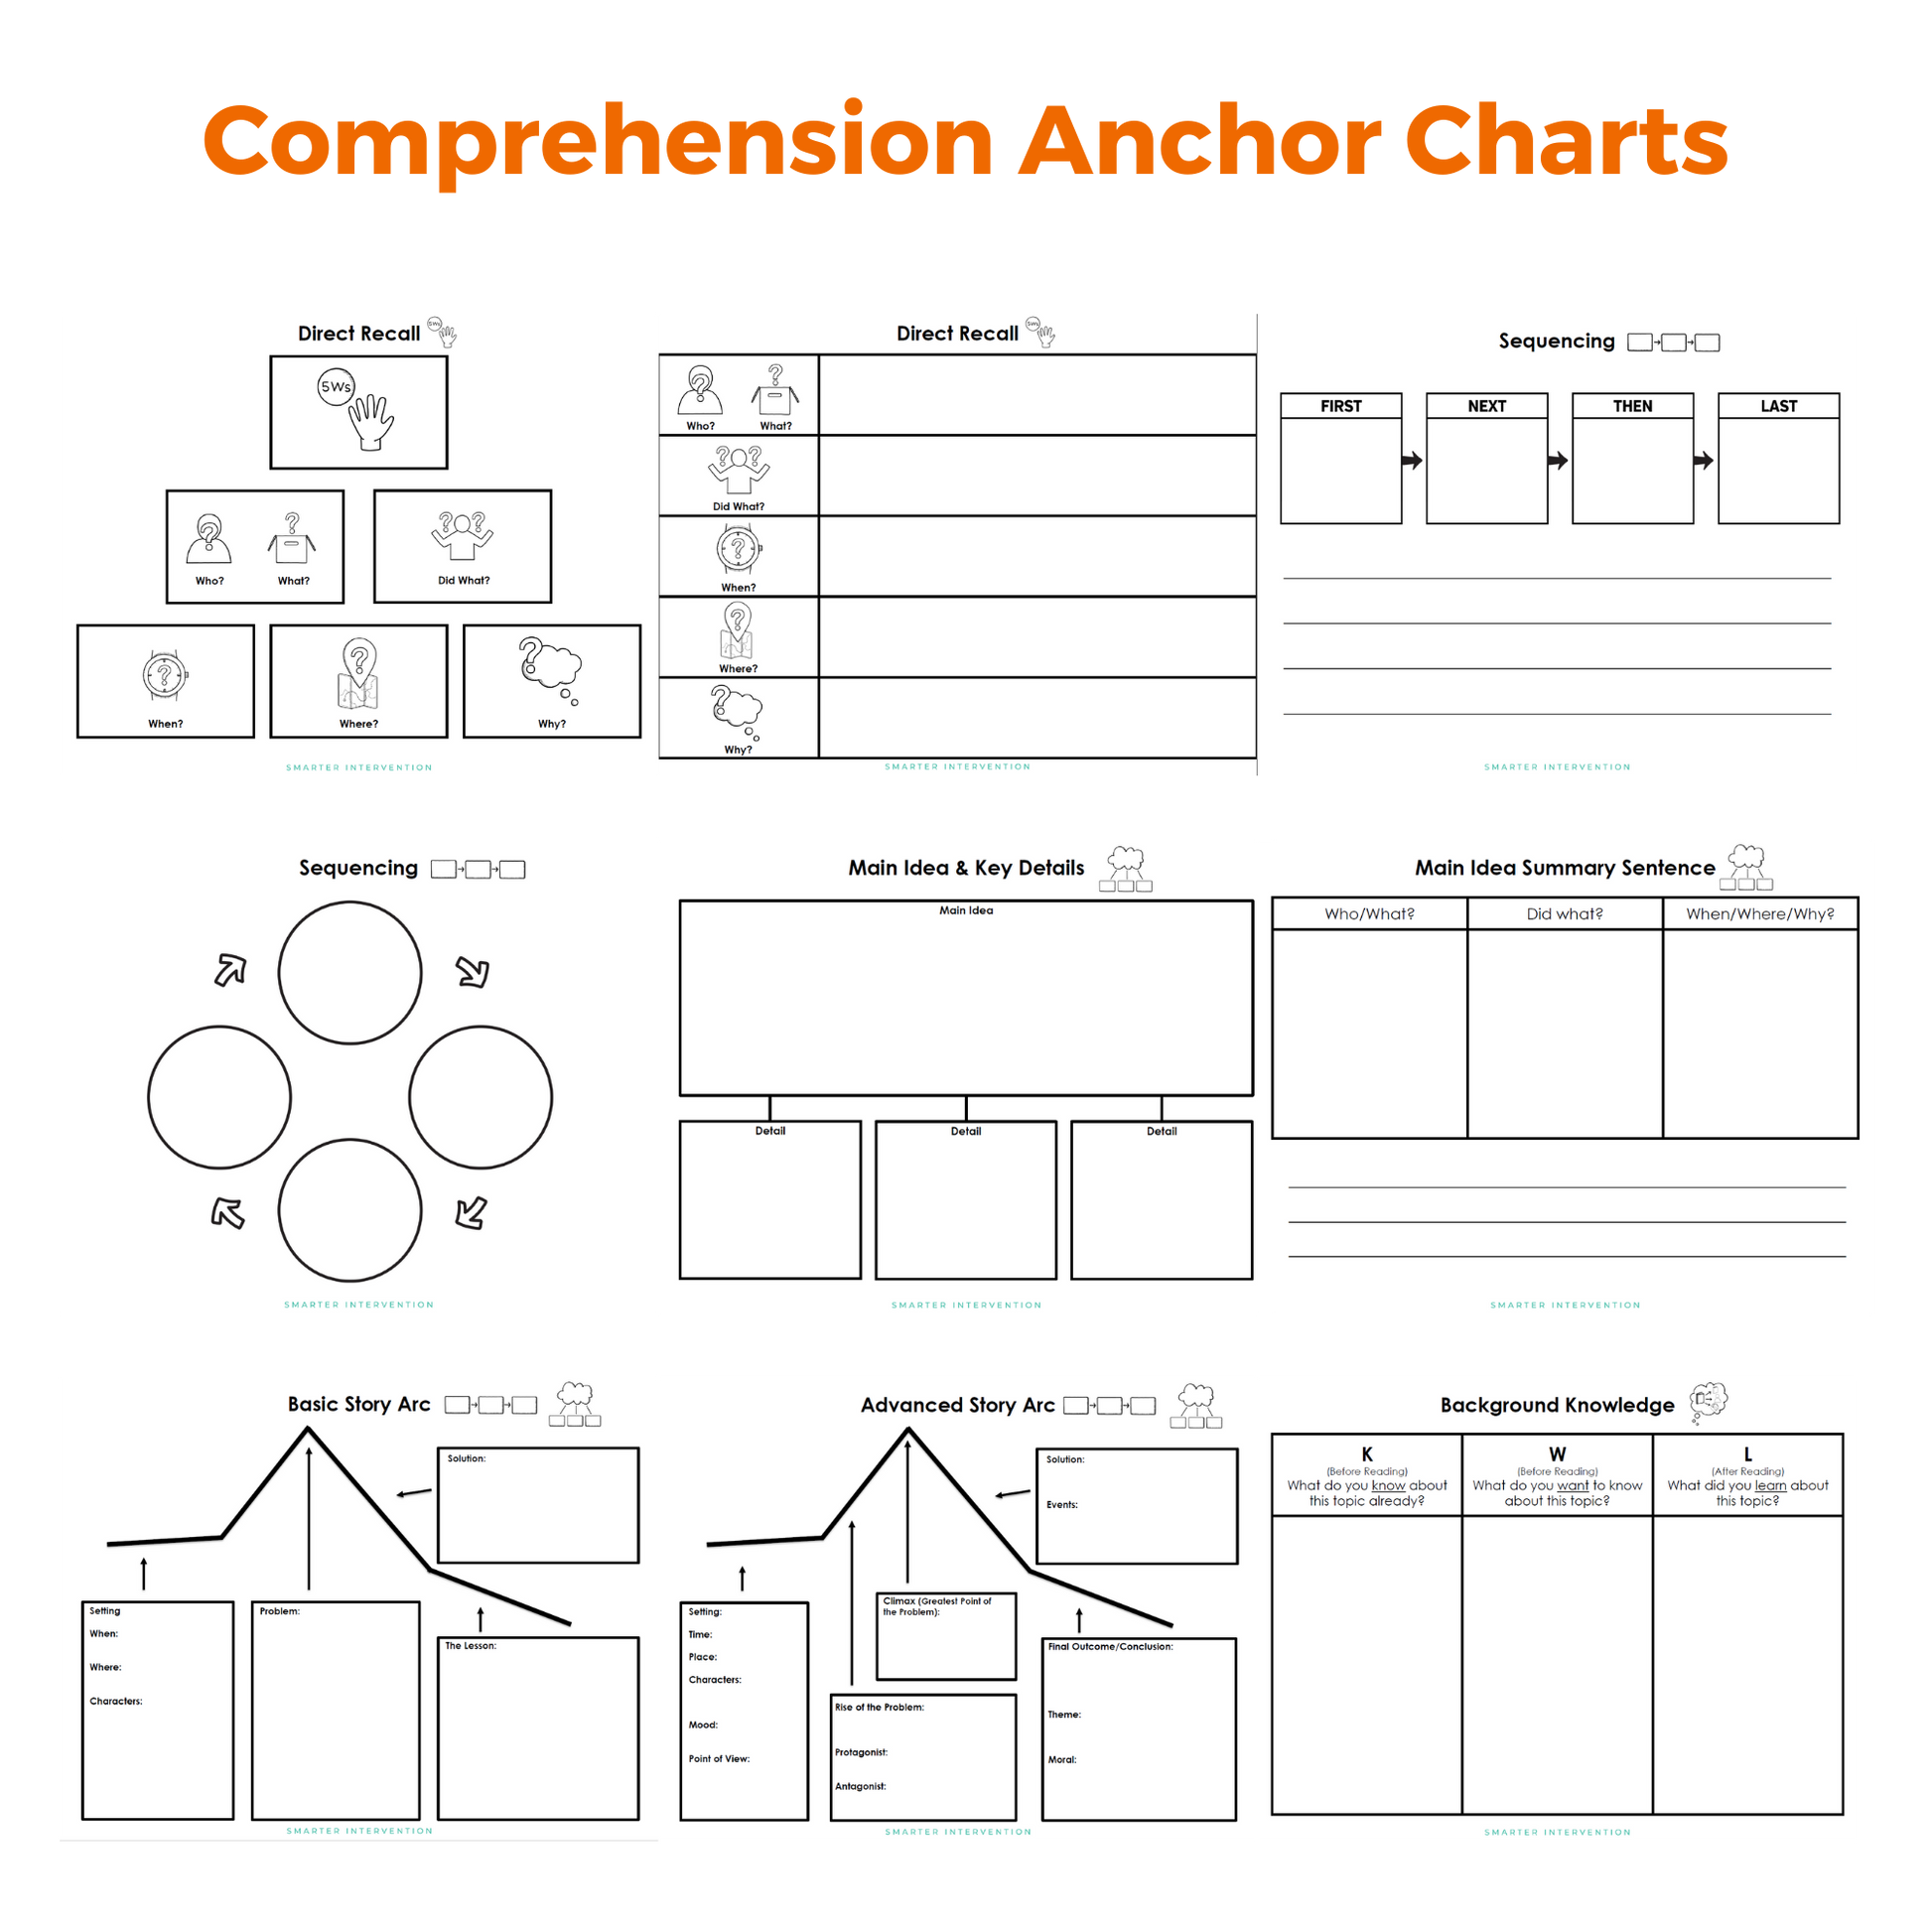 story structure anchor chart